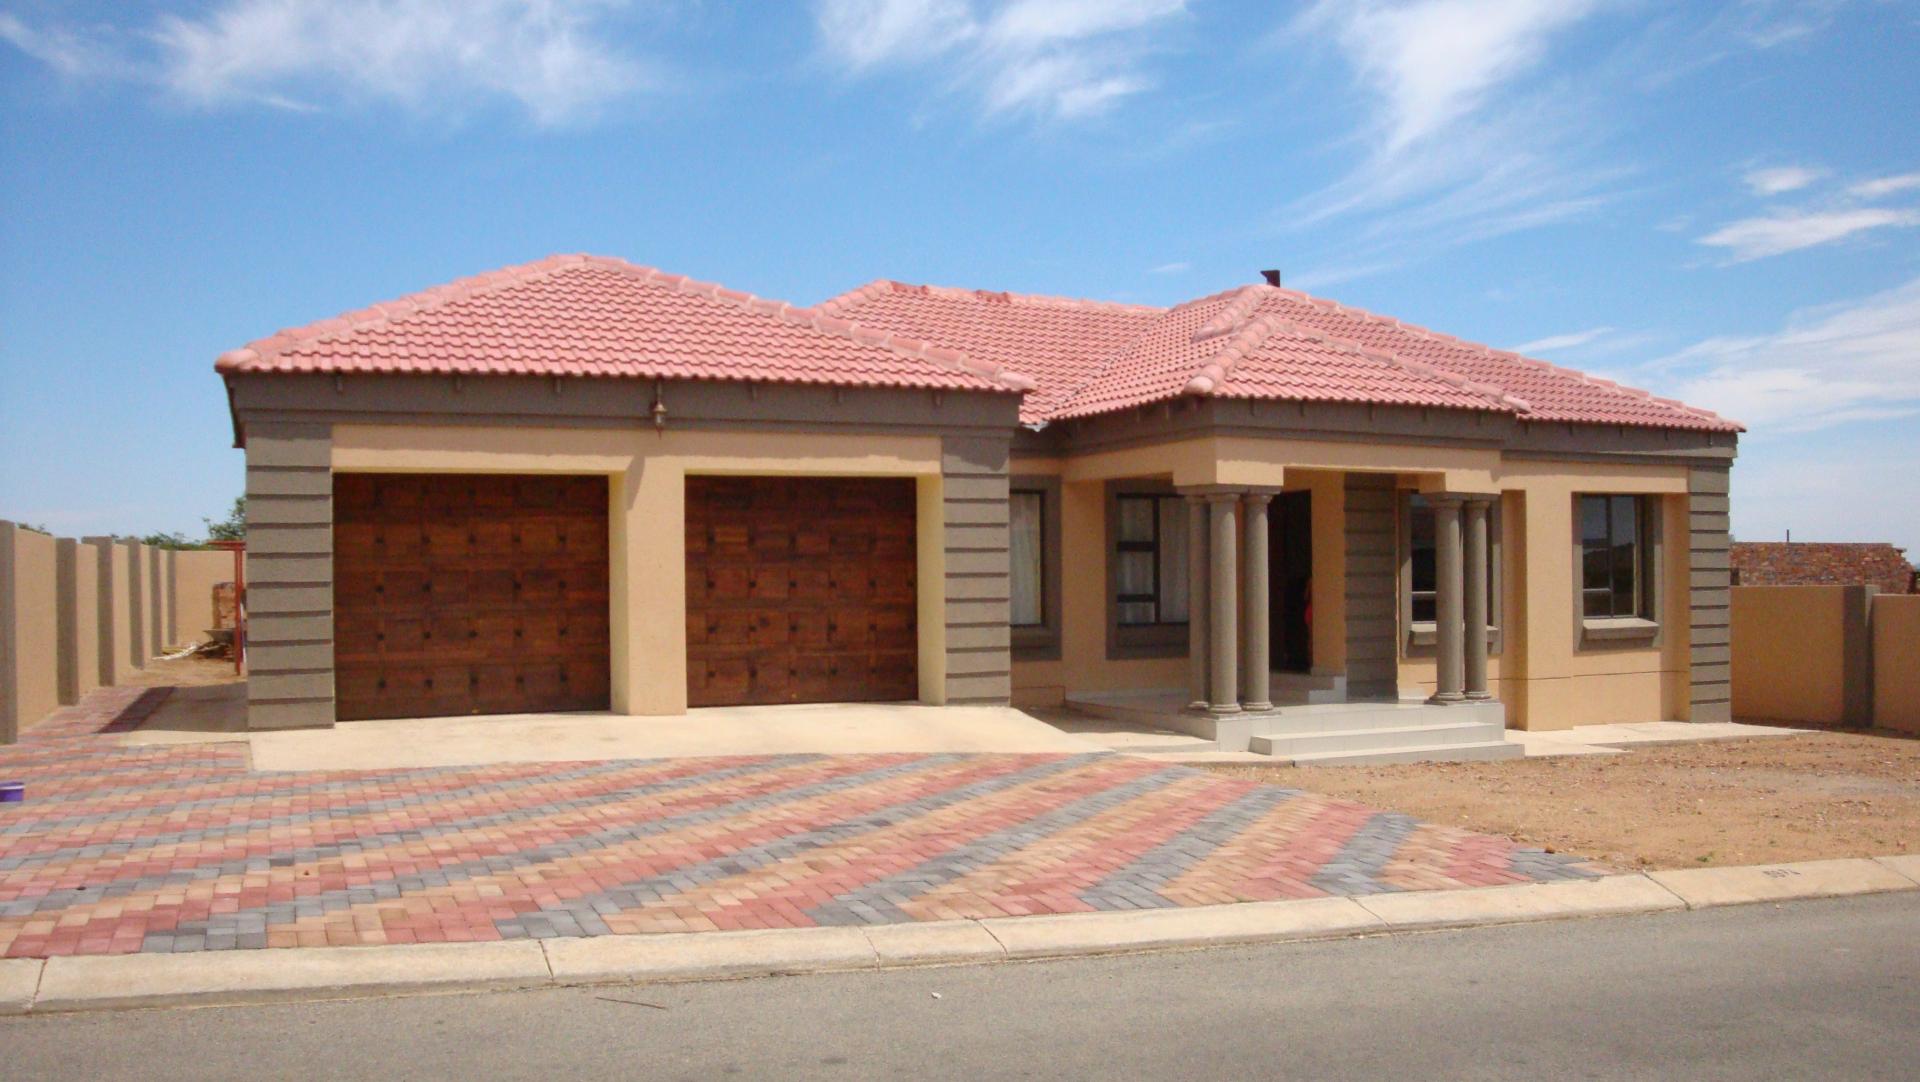 15+ House Plans Pictures In Polokwane